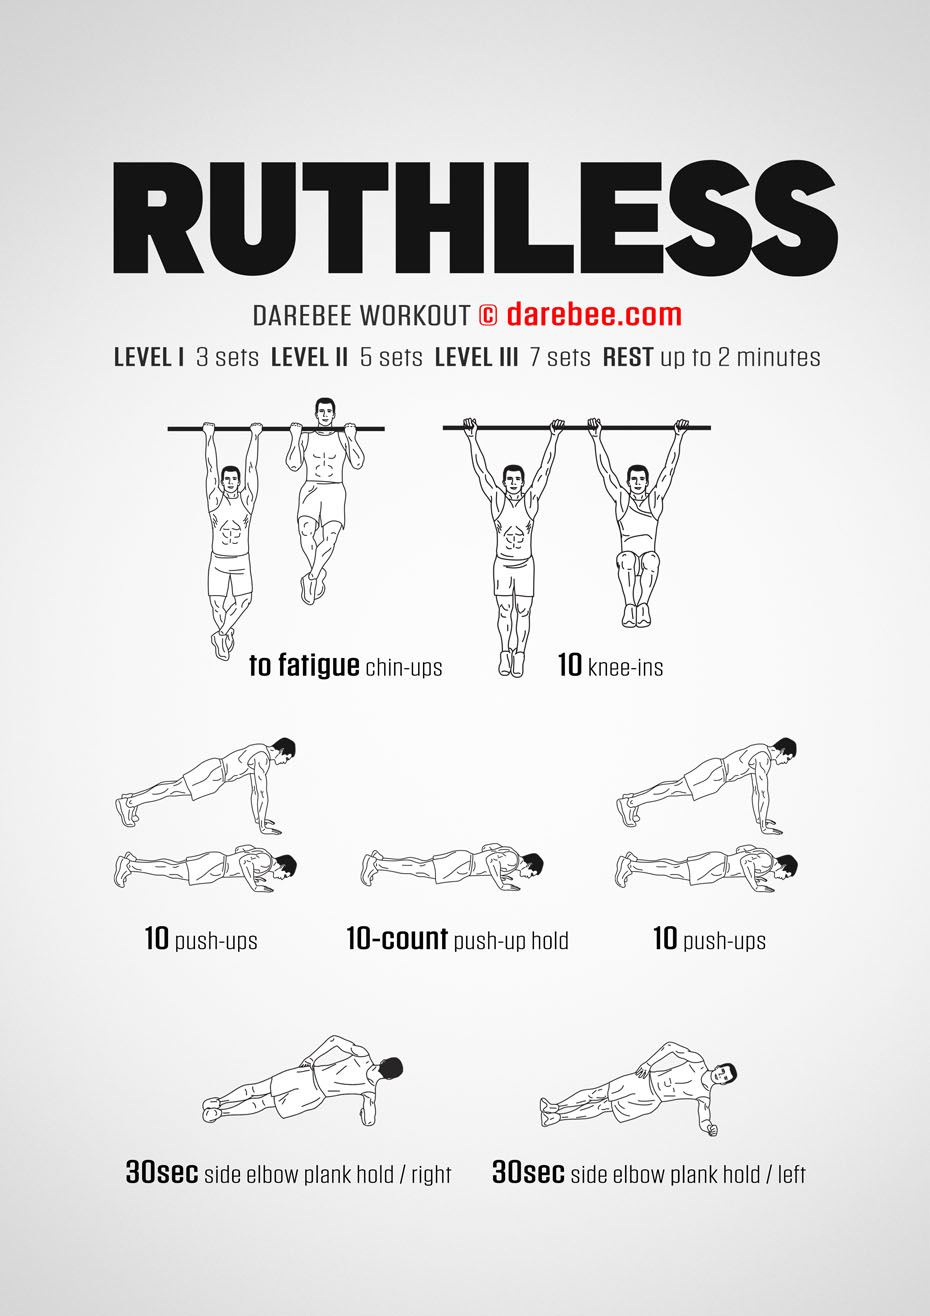 Ruthless Workout